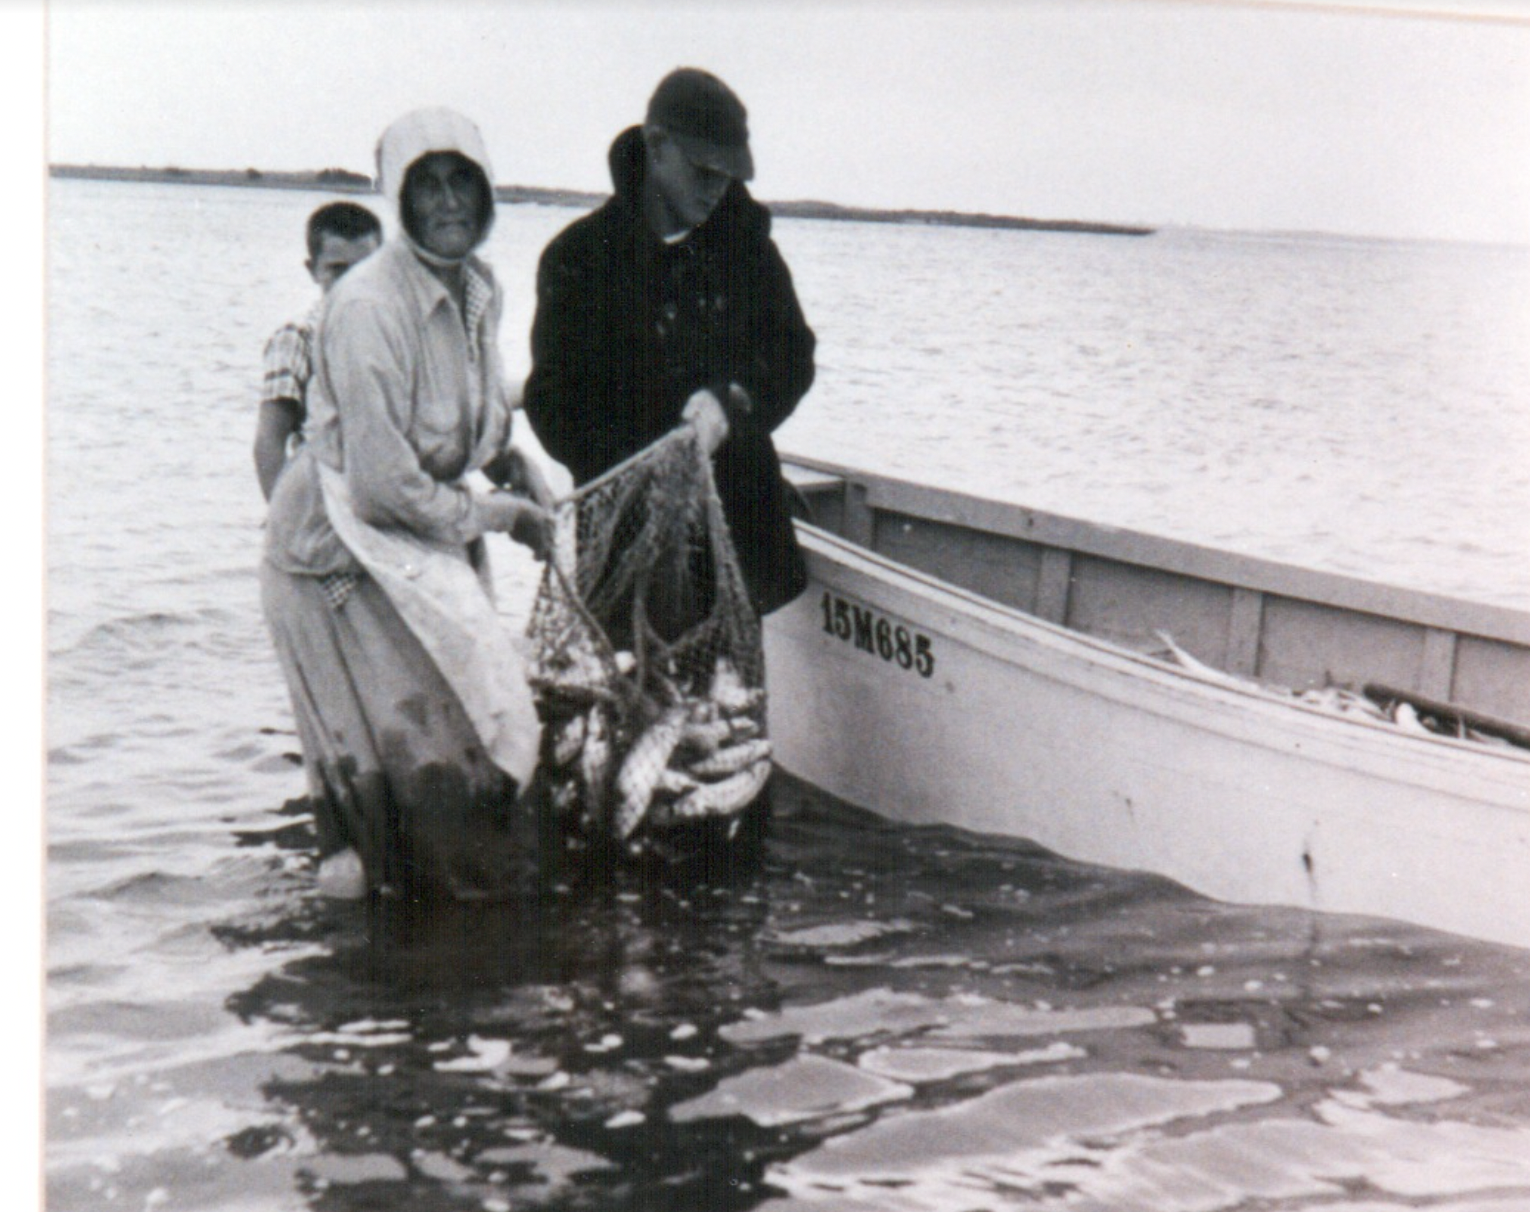 Ms. Dora, wearing her bonnet, in the water next to boat. Marvin is the barely visible boy standing behind her